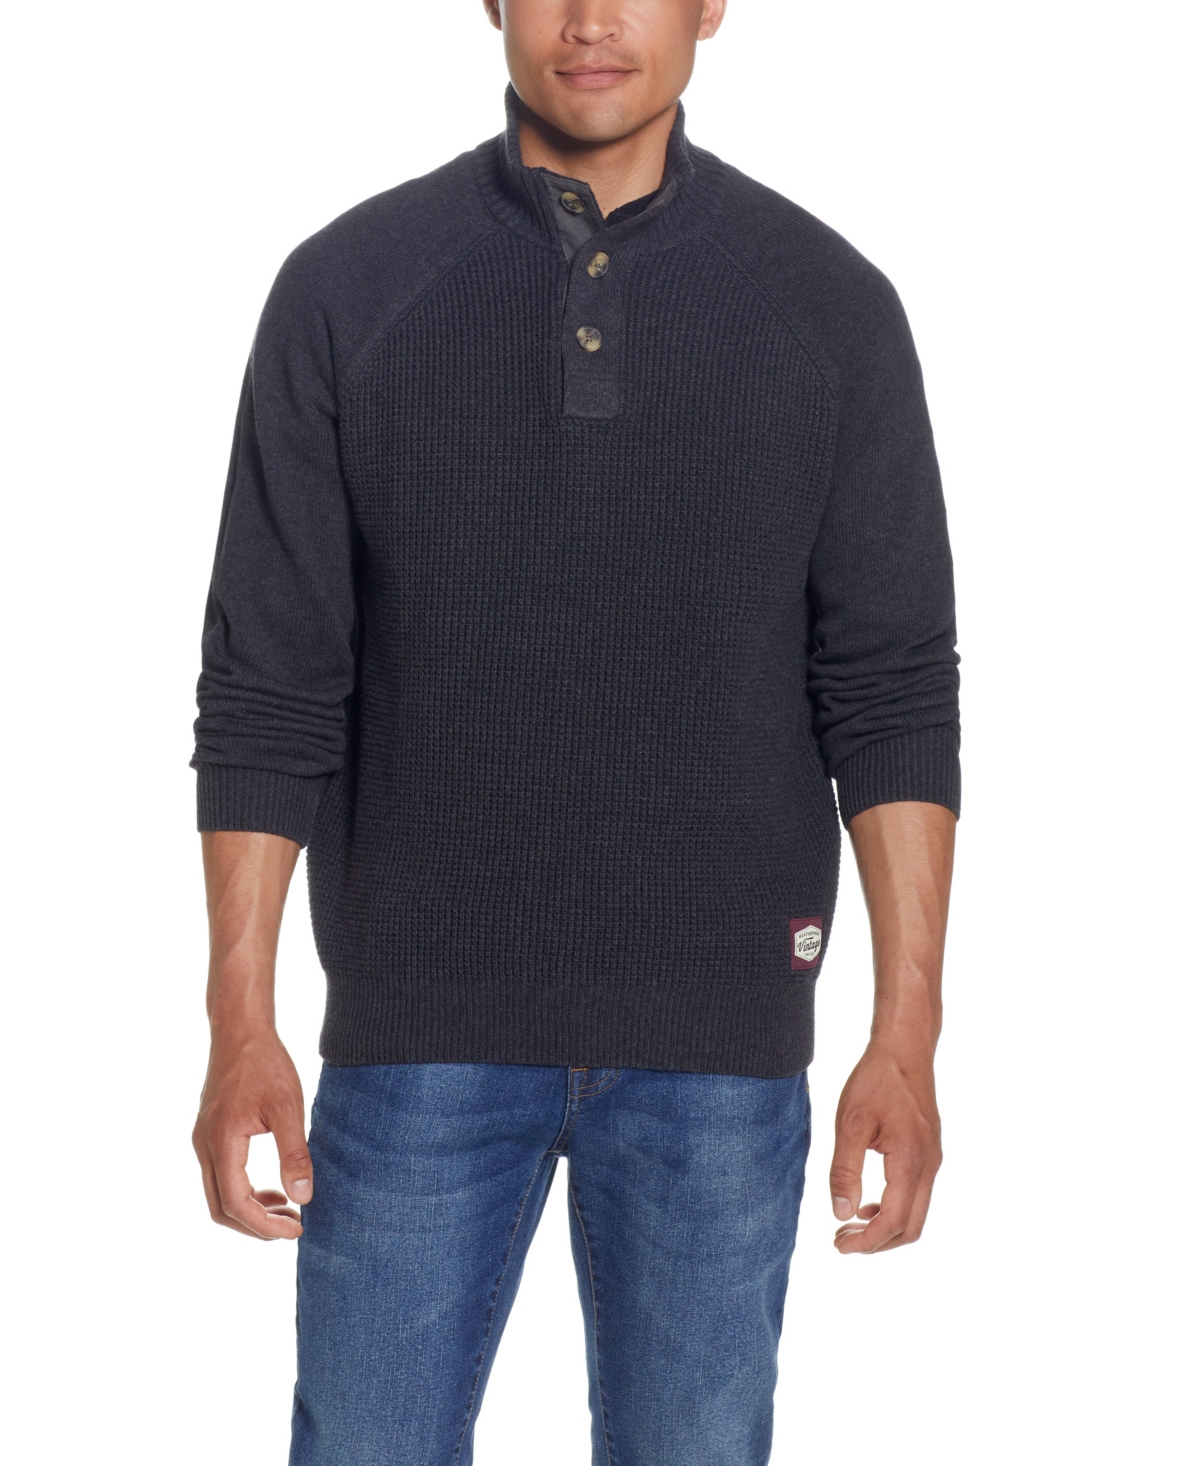 Men's Button Mock Neck Sweater - Charcoal Heather